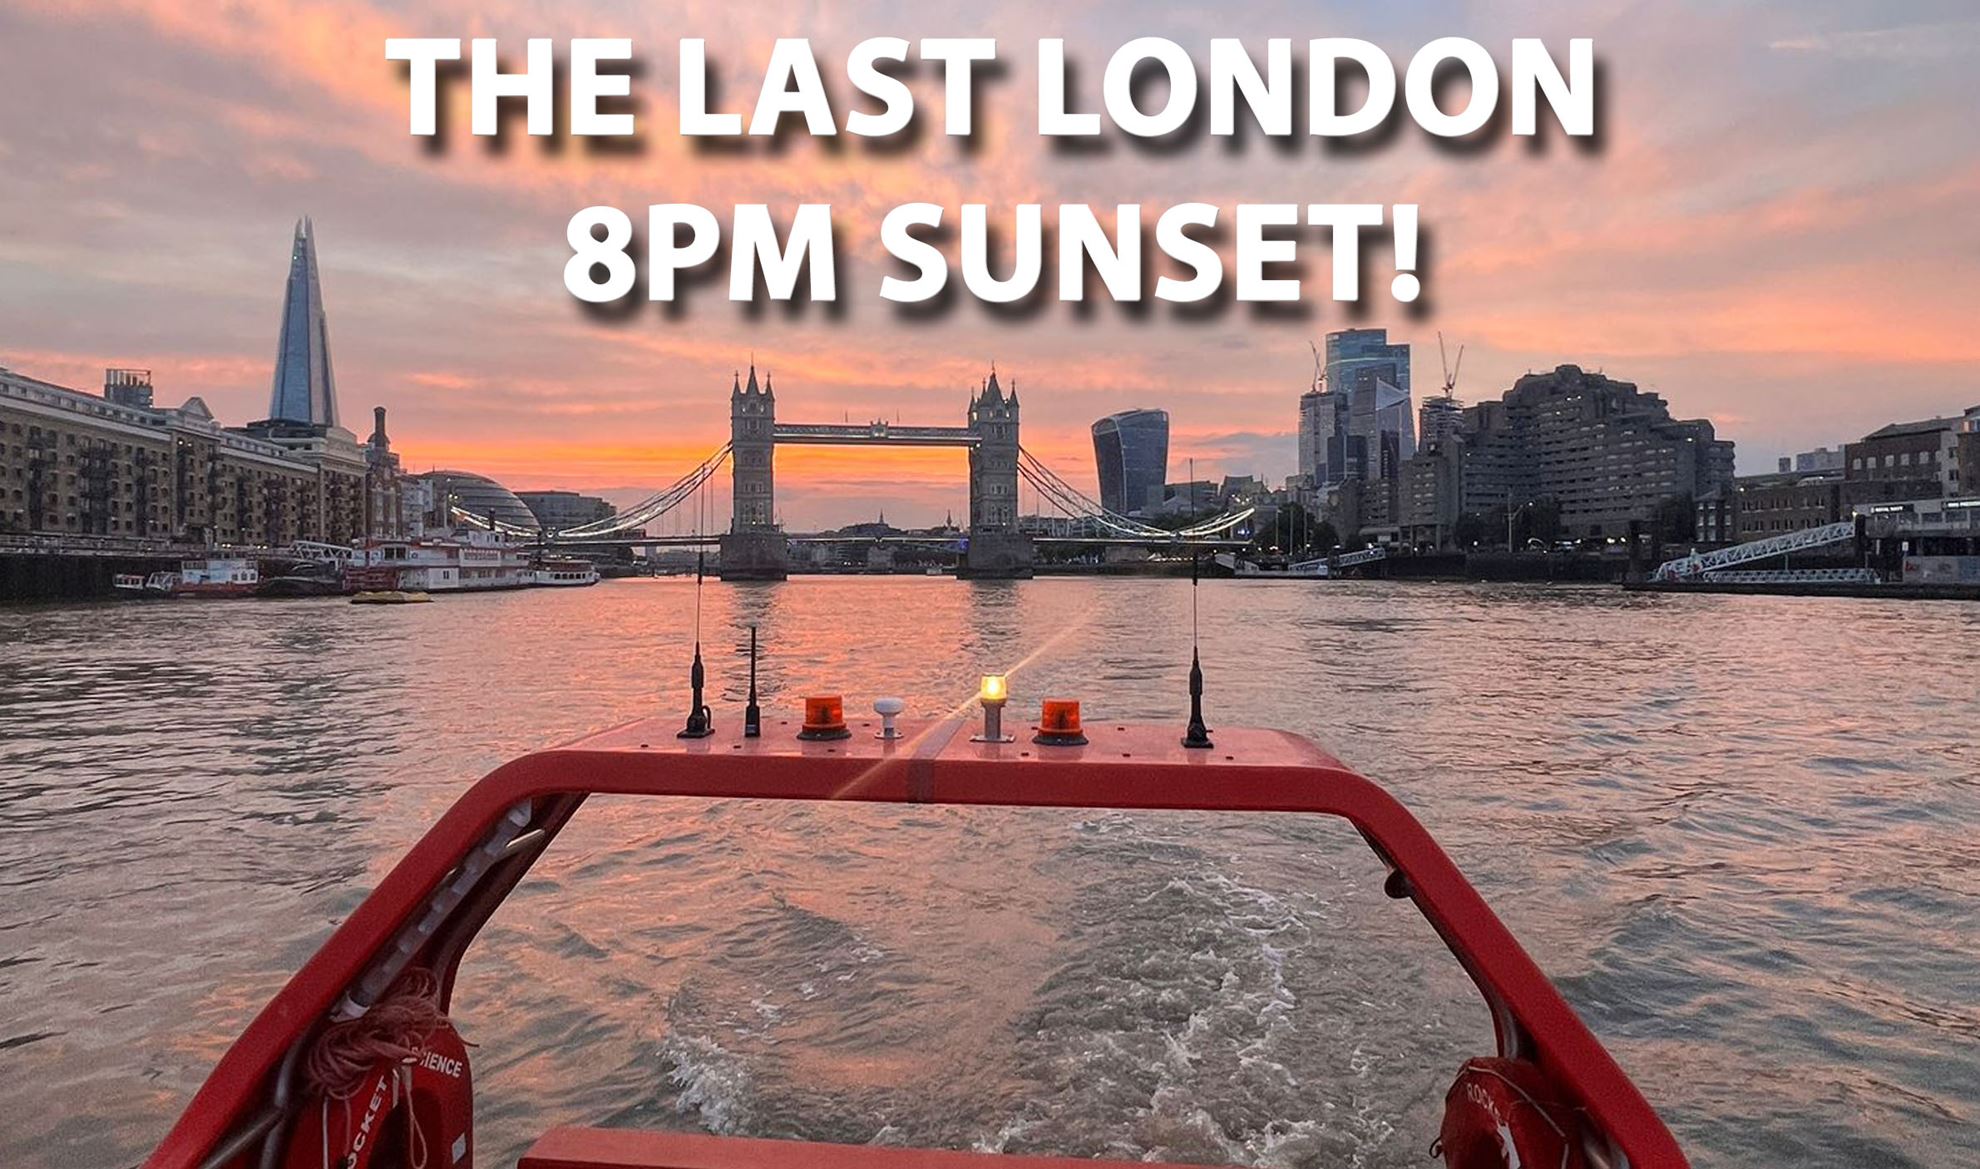 London’s 8pm sunsets are set to end this week!